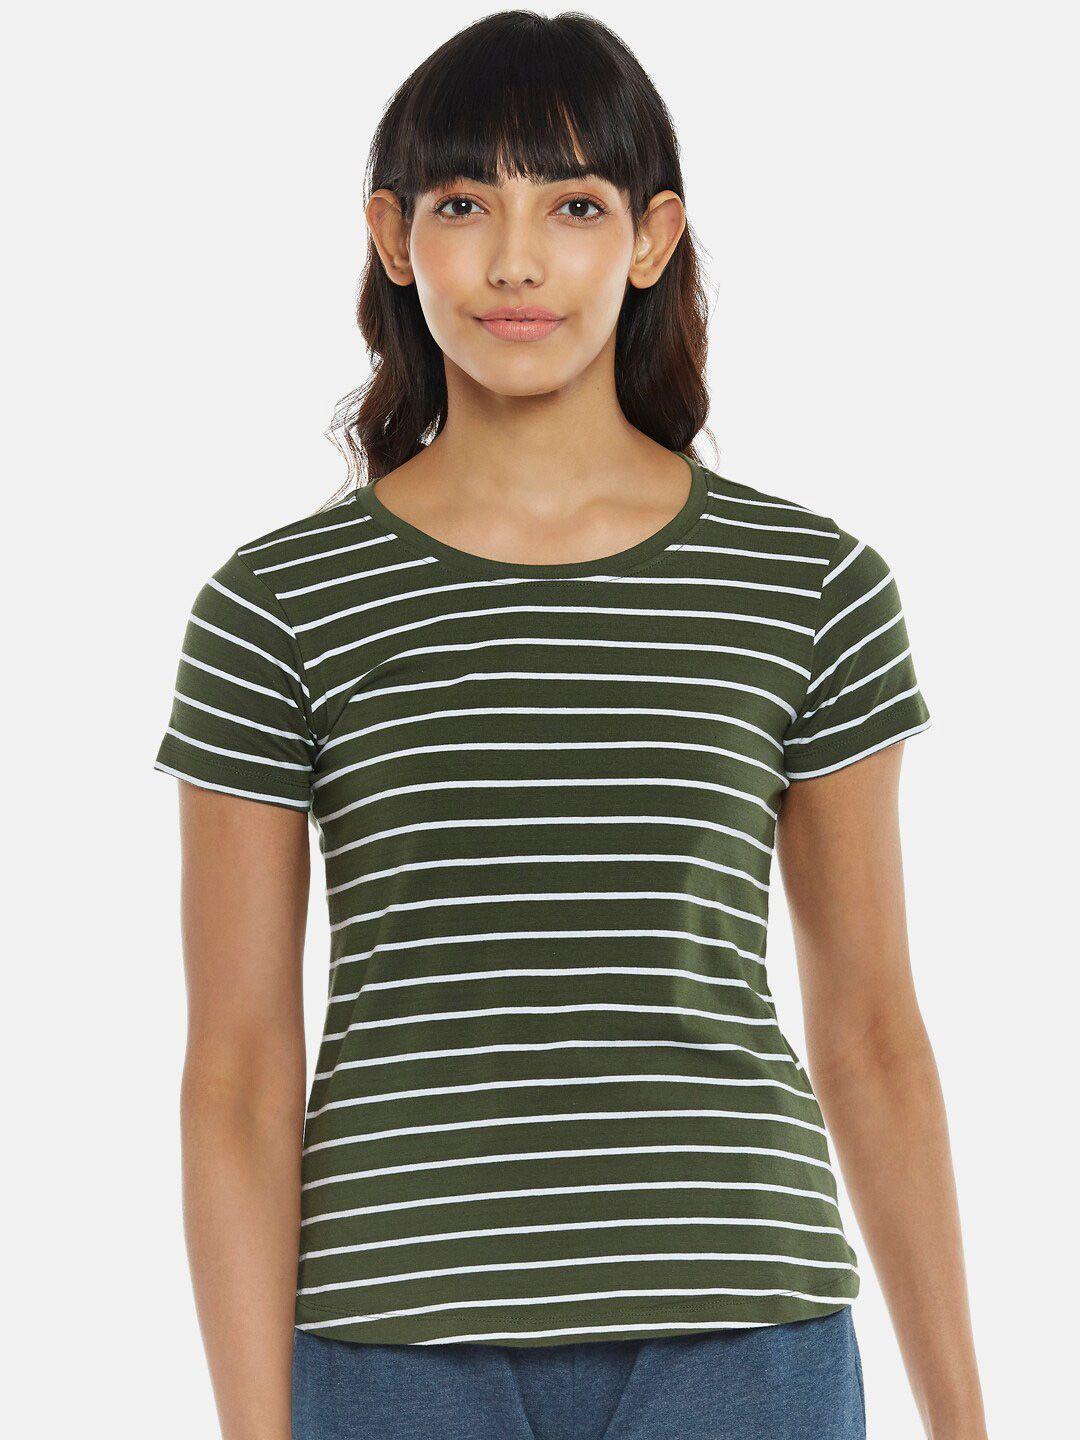 dreamz-by-pantaloons-women-olive-green-striped-pure-cotton-top